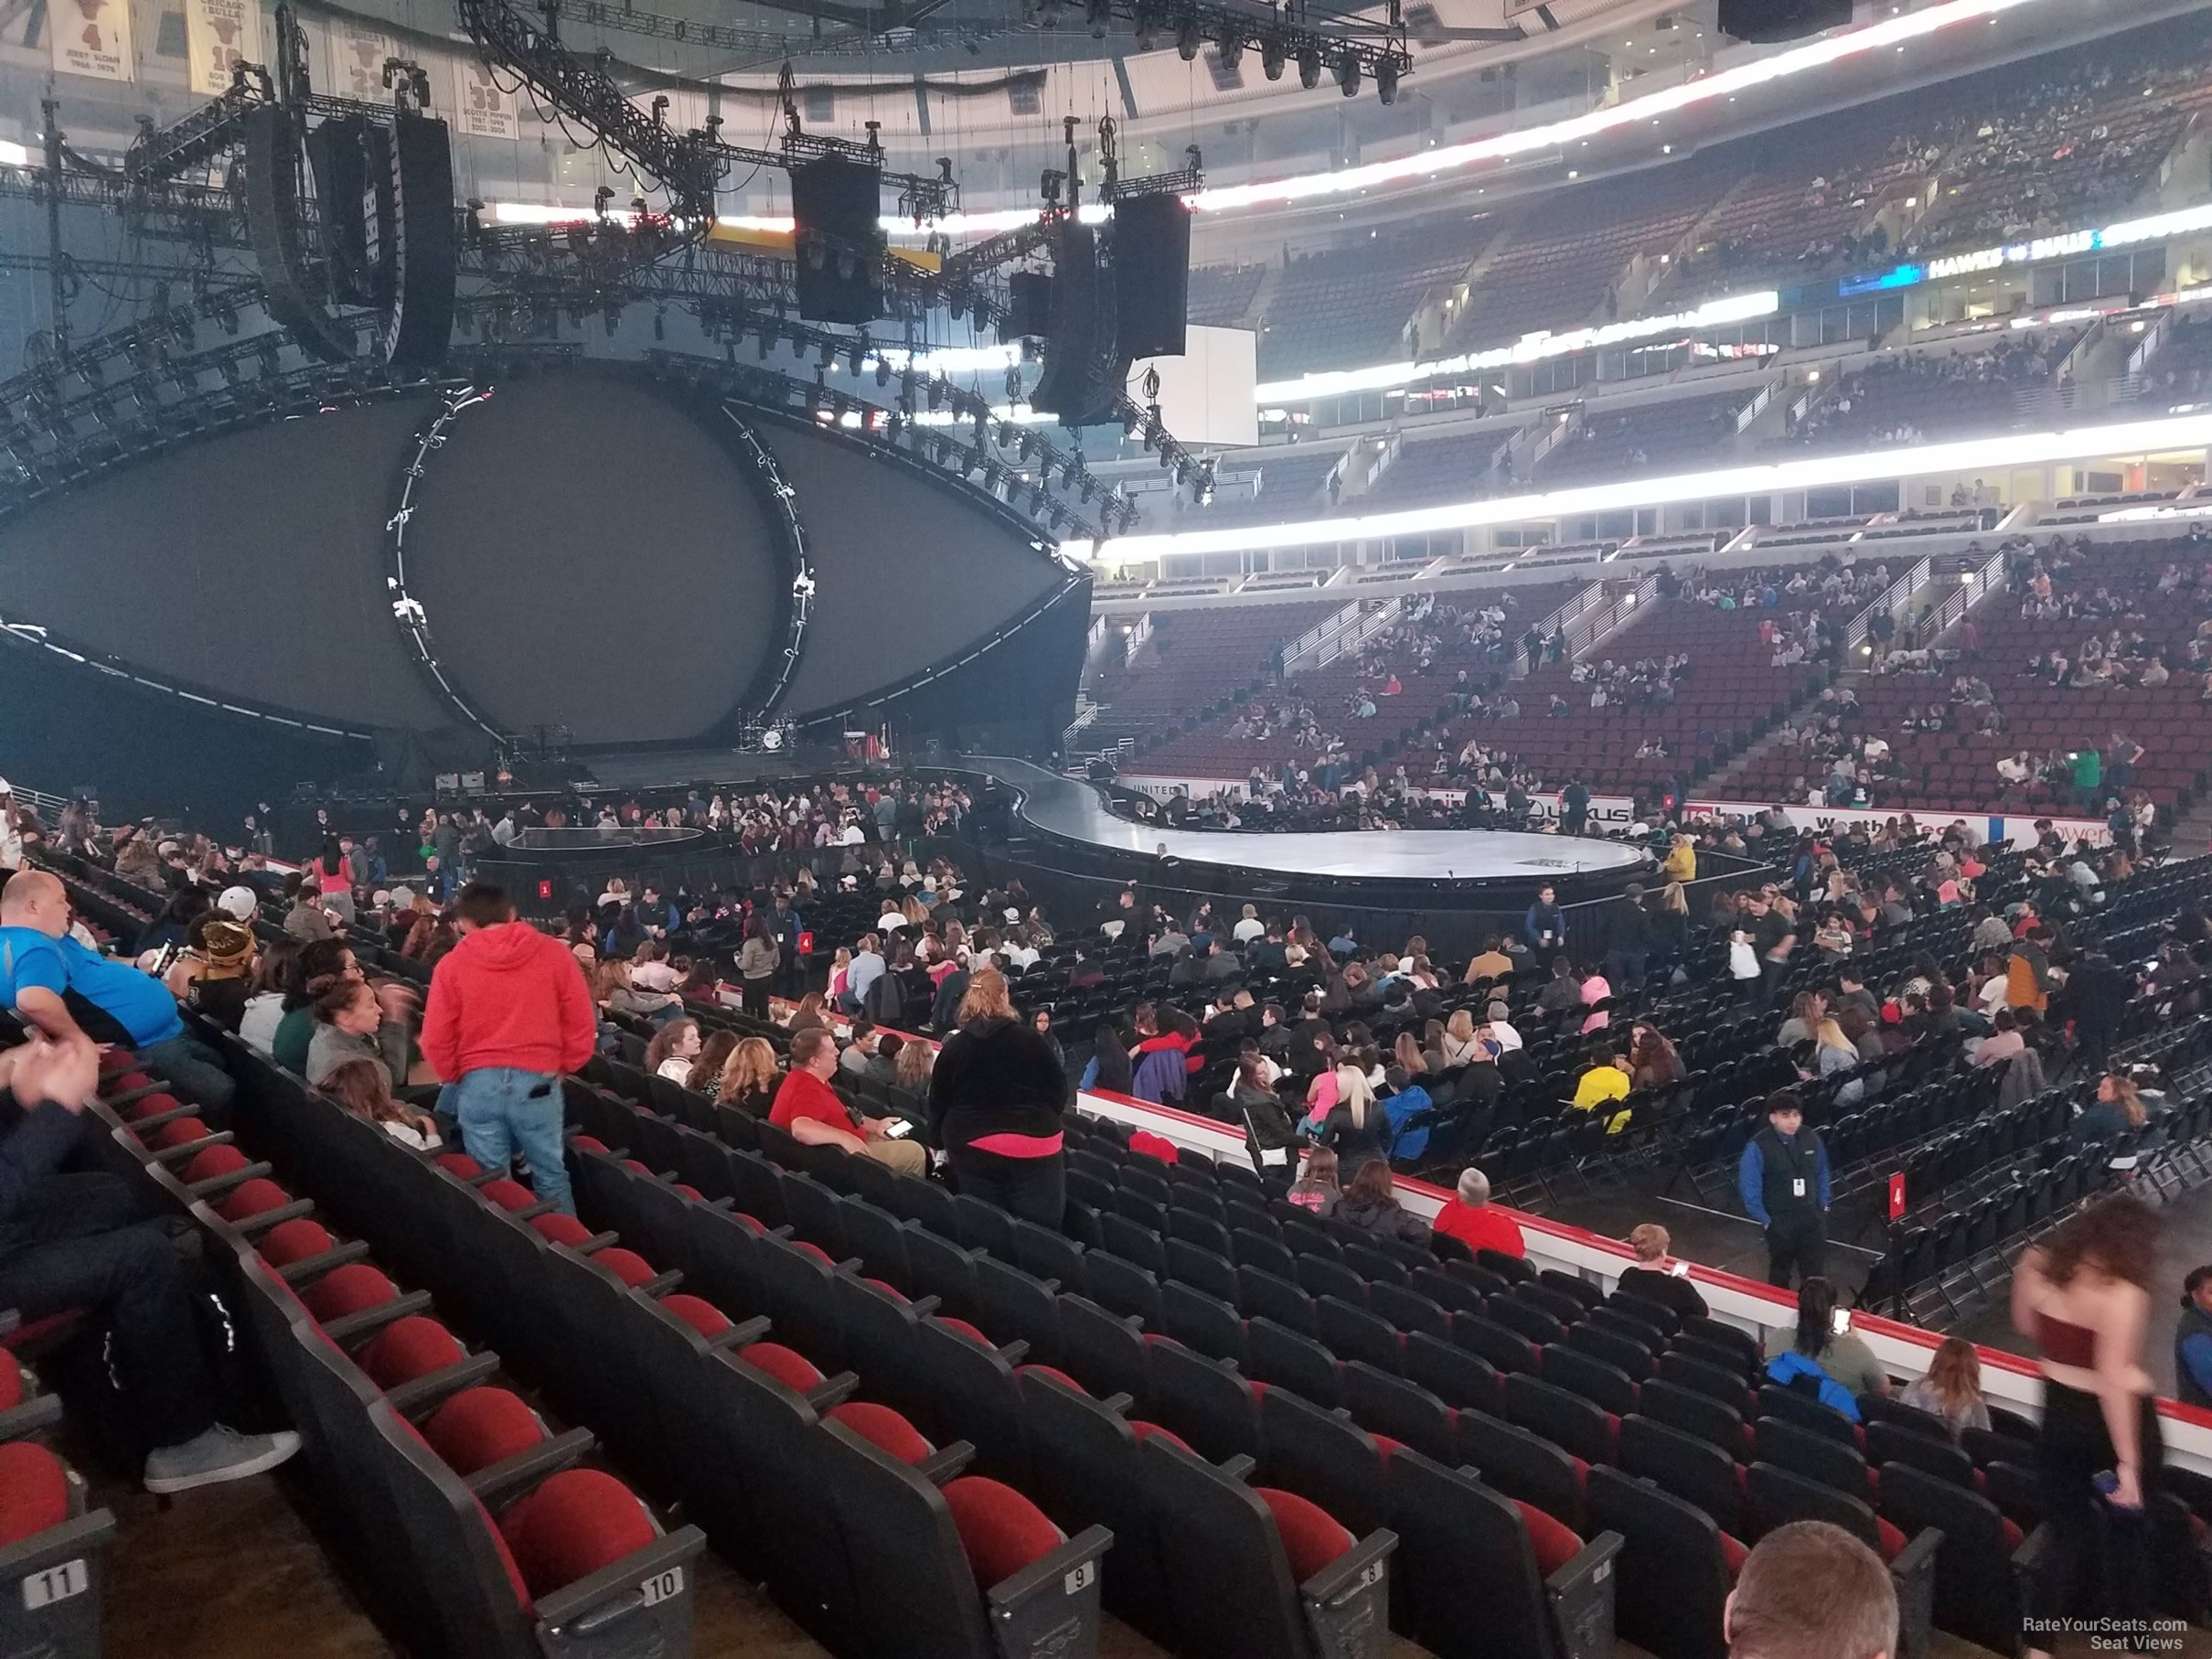 section 109, row 12 seat view  for concert - united center